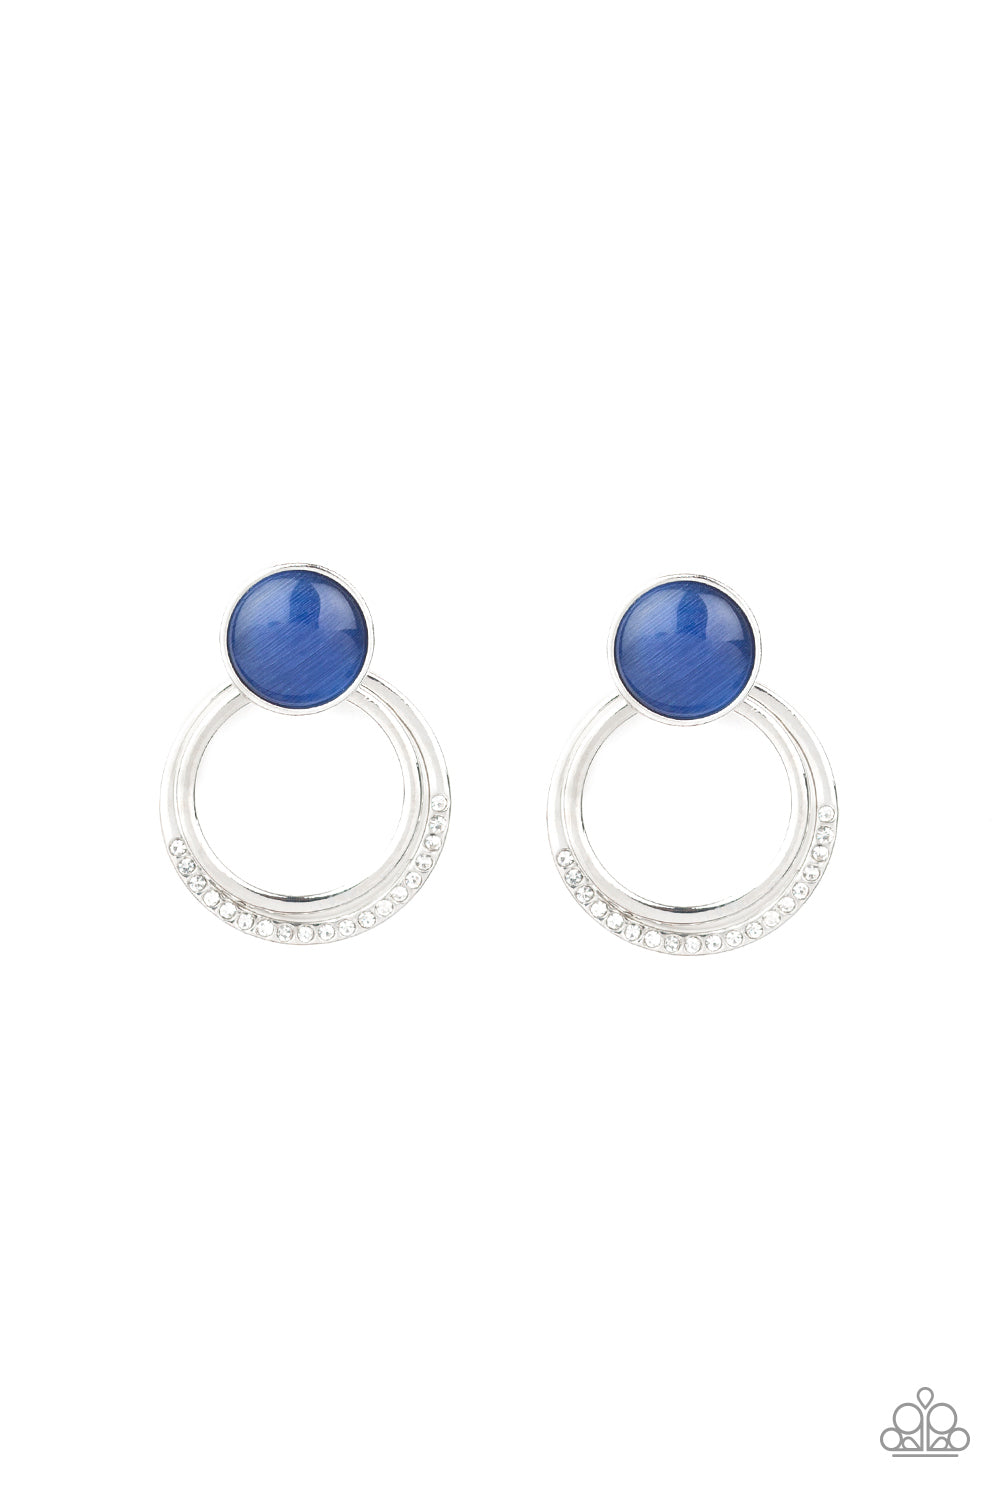 A plain silver hoop and white rhinestone encrusted hoop swing from the bottom of a glowing blue cat's eye stone fitting for a whimsical fashion. Earring attaches to a standard post fitting.